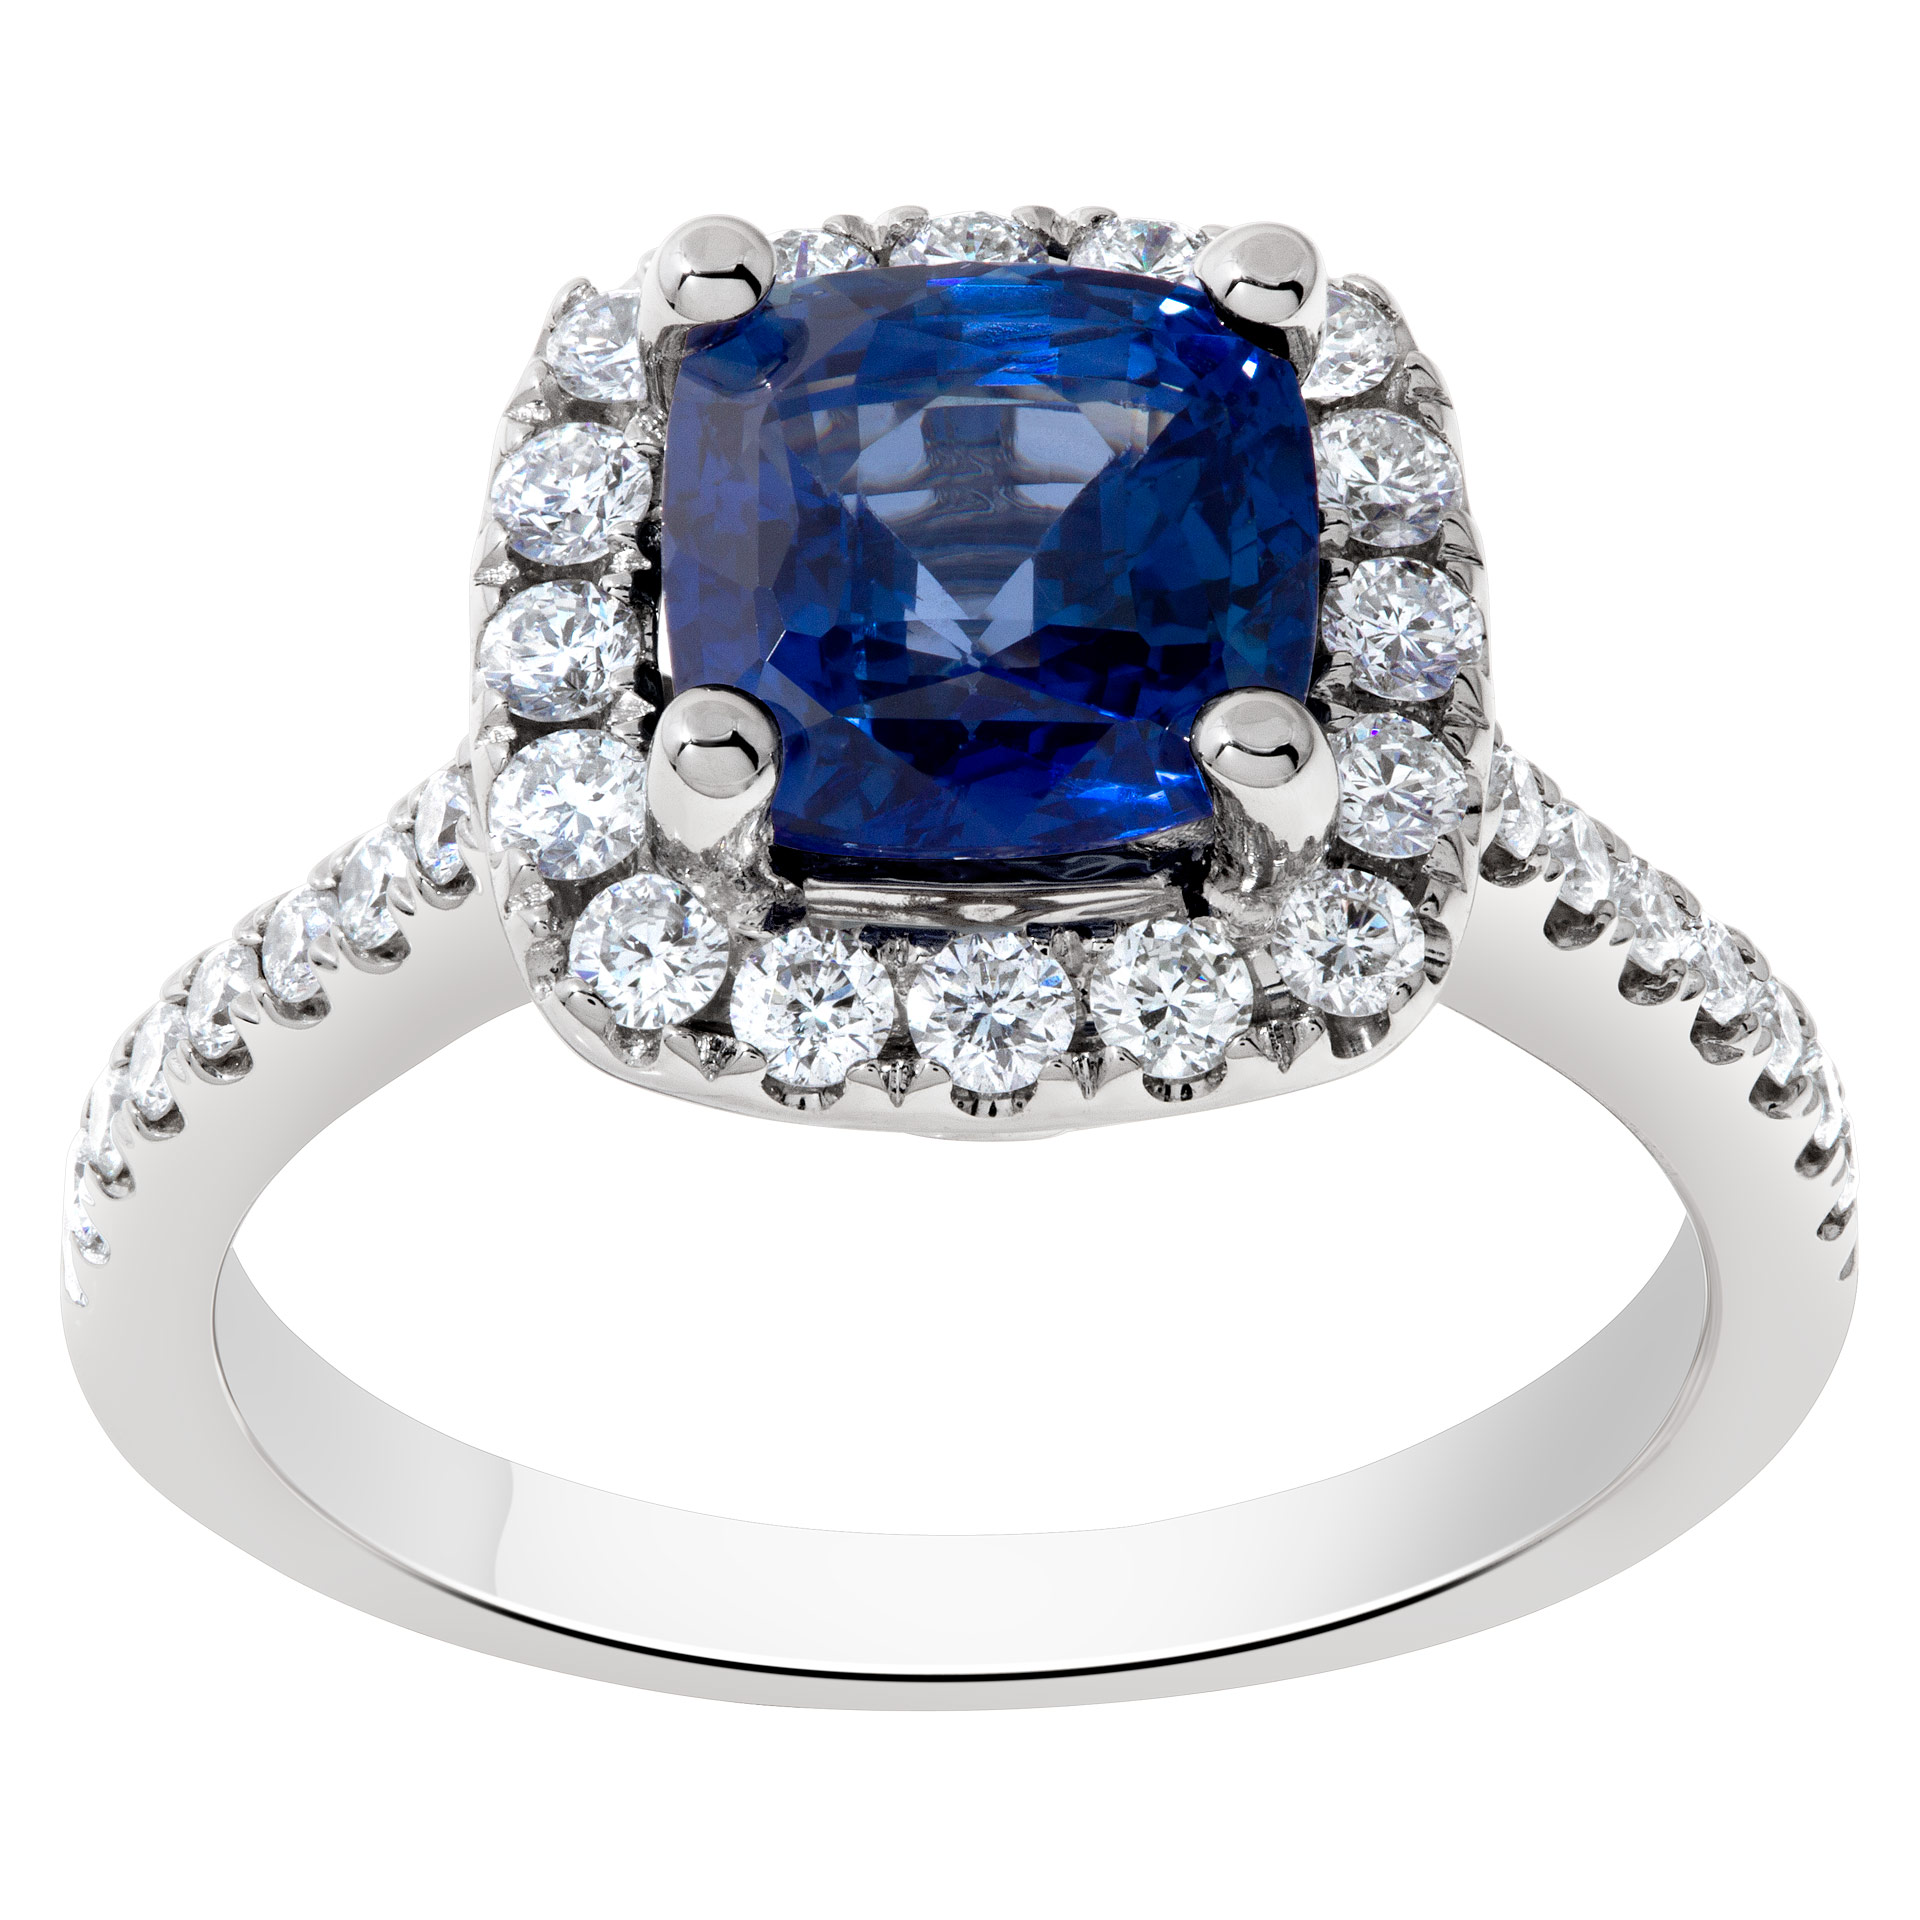 Diamond and cushion brilliant cut sapphire ring in 18k white gold. image 1